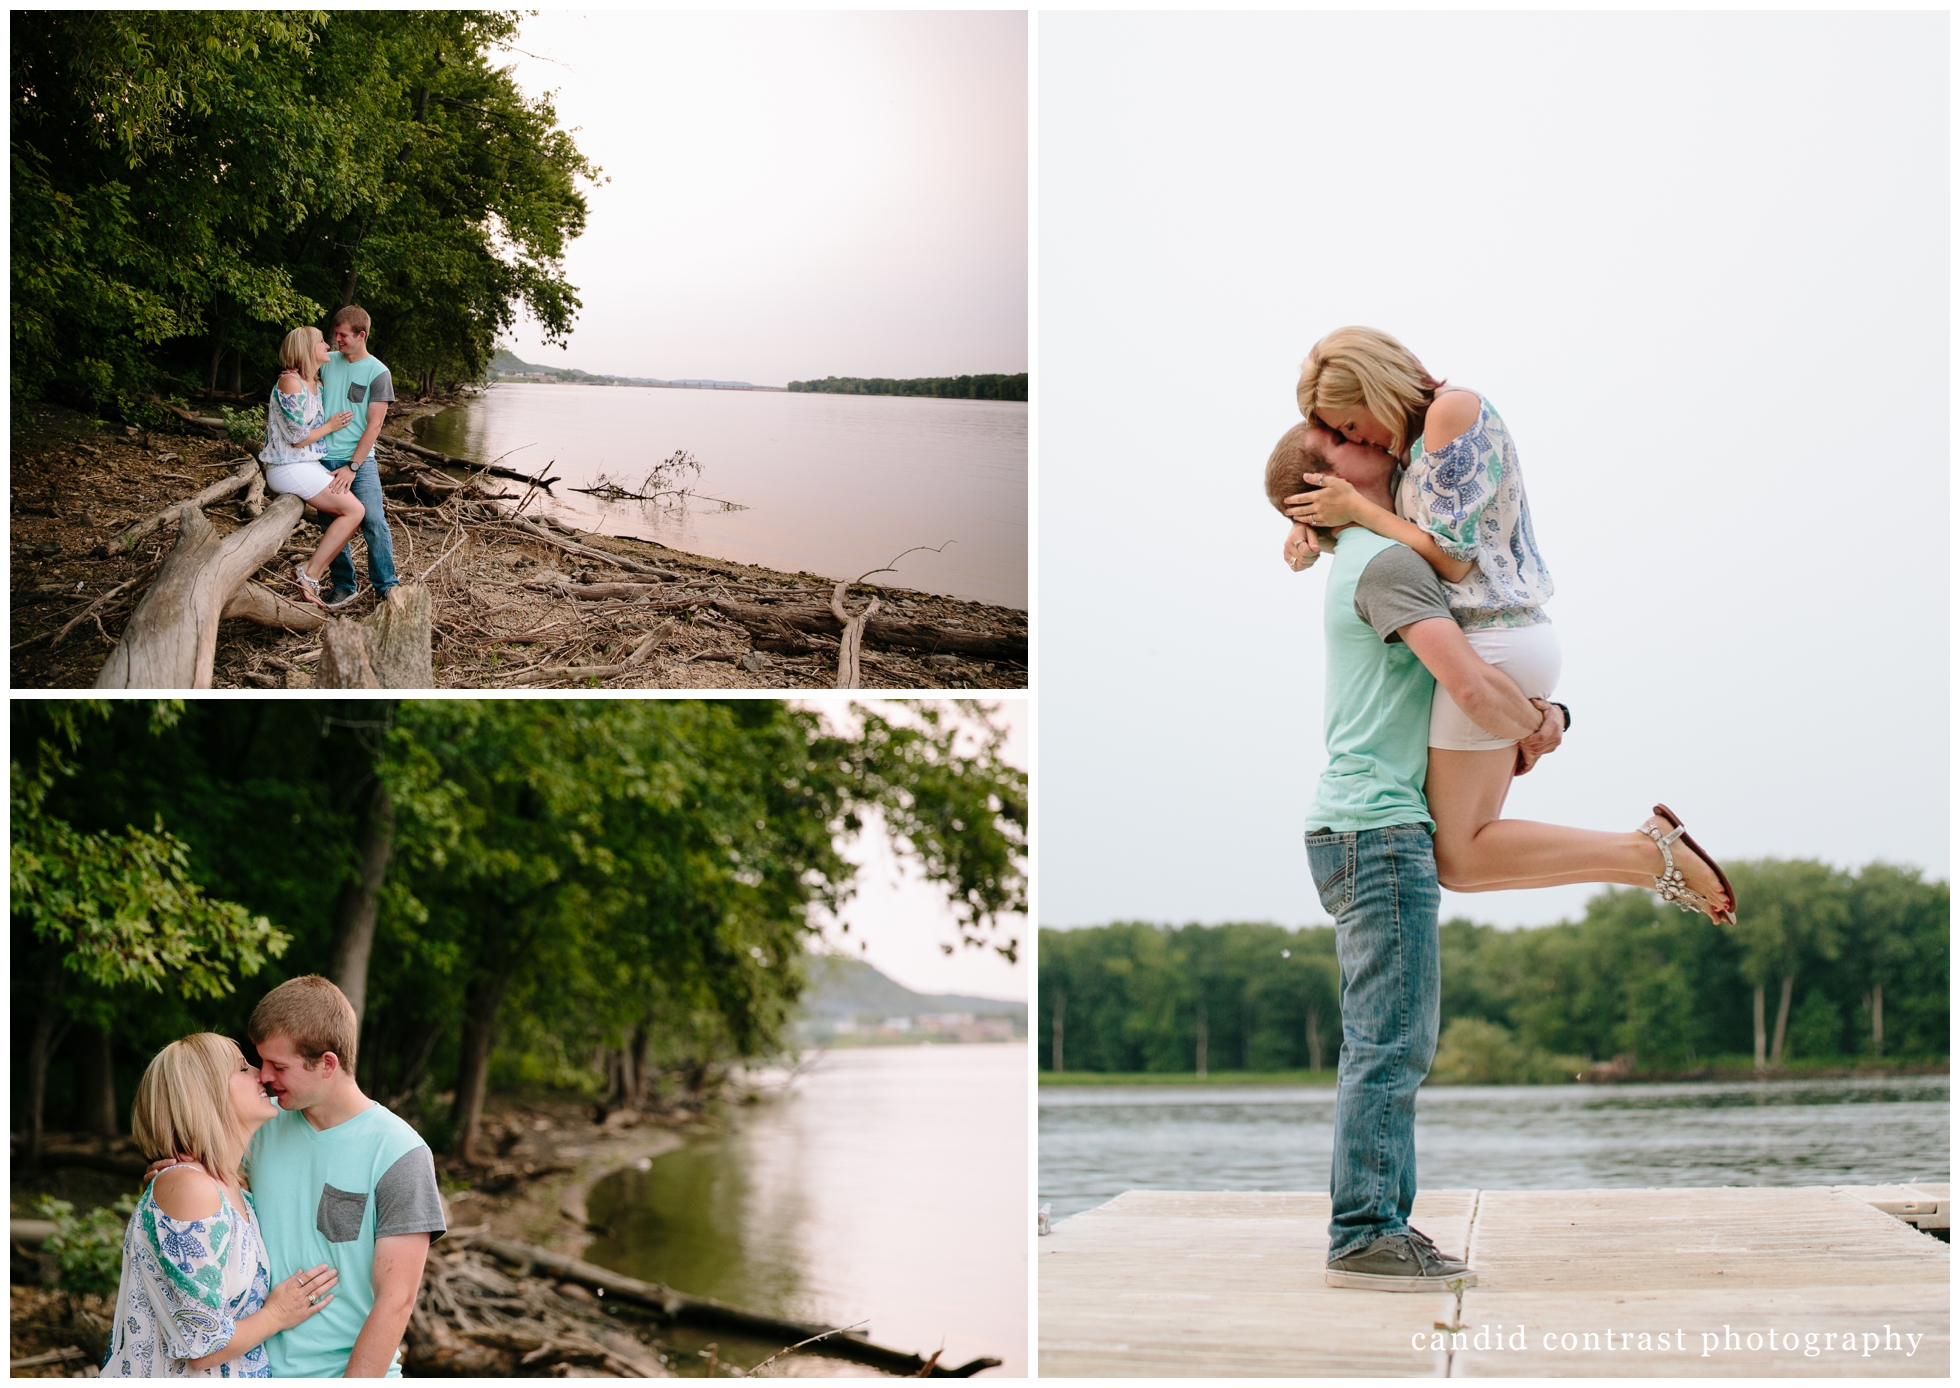 Mississippi river engagement session, Bellevue IA engagement session, candid contrast photography